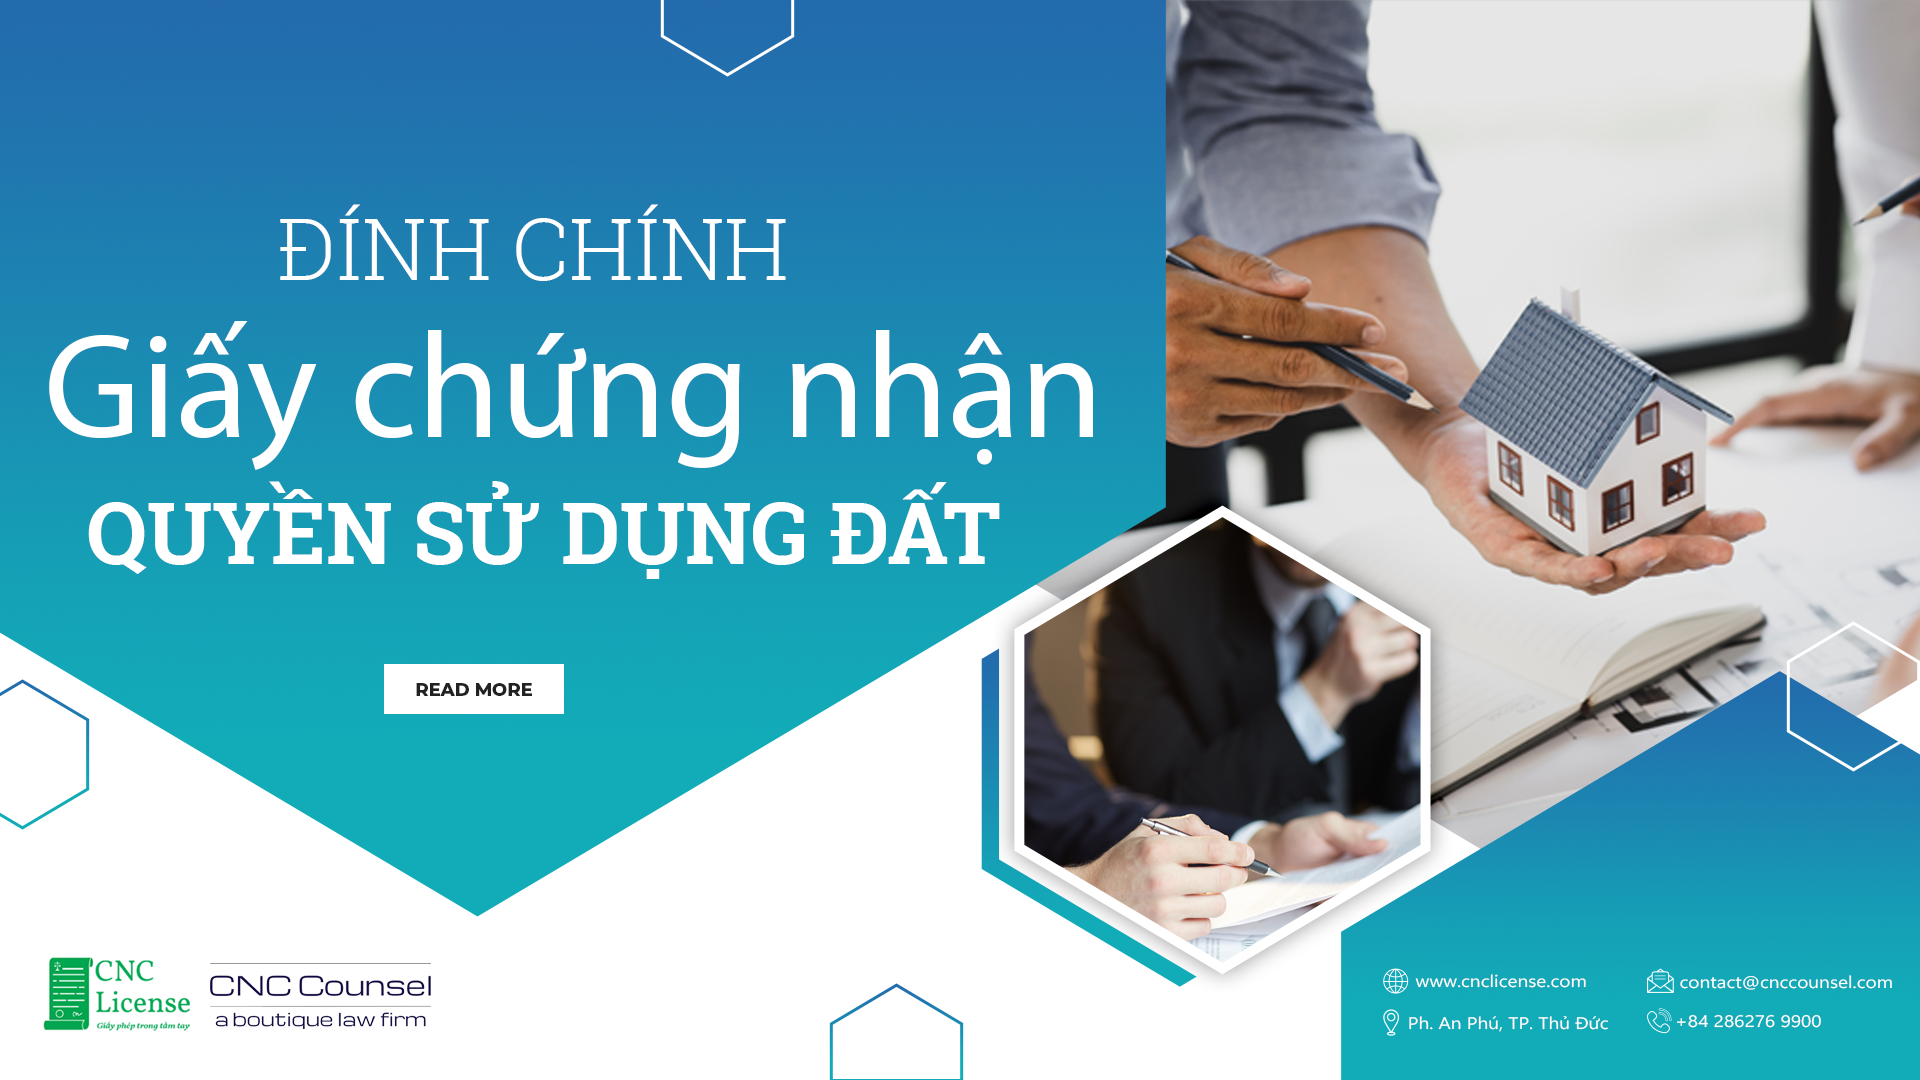 https://cnclicense.com/wp-content/uploads/2023/04/50.Dinh-chinh-giay-chung-nhan-quyen-su-dung-dat.png